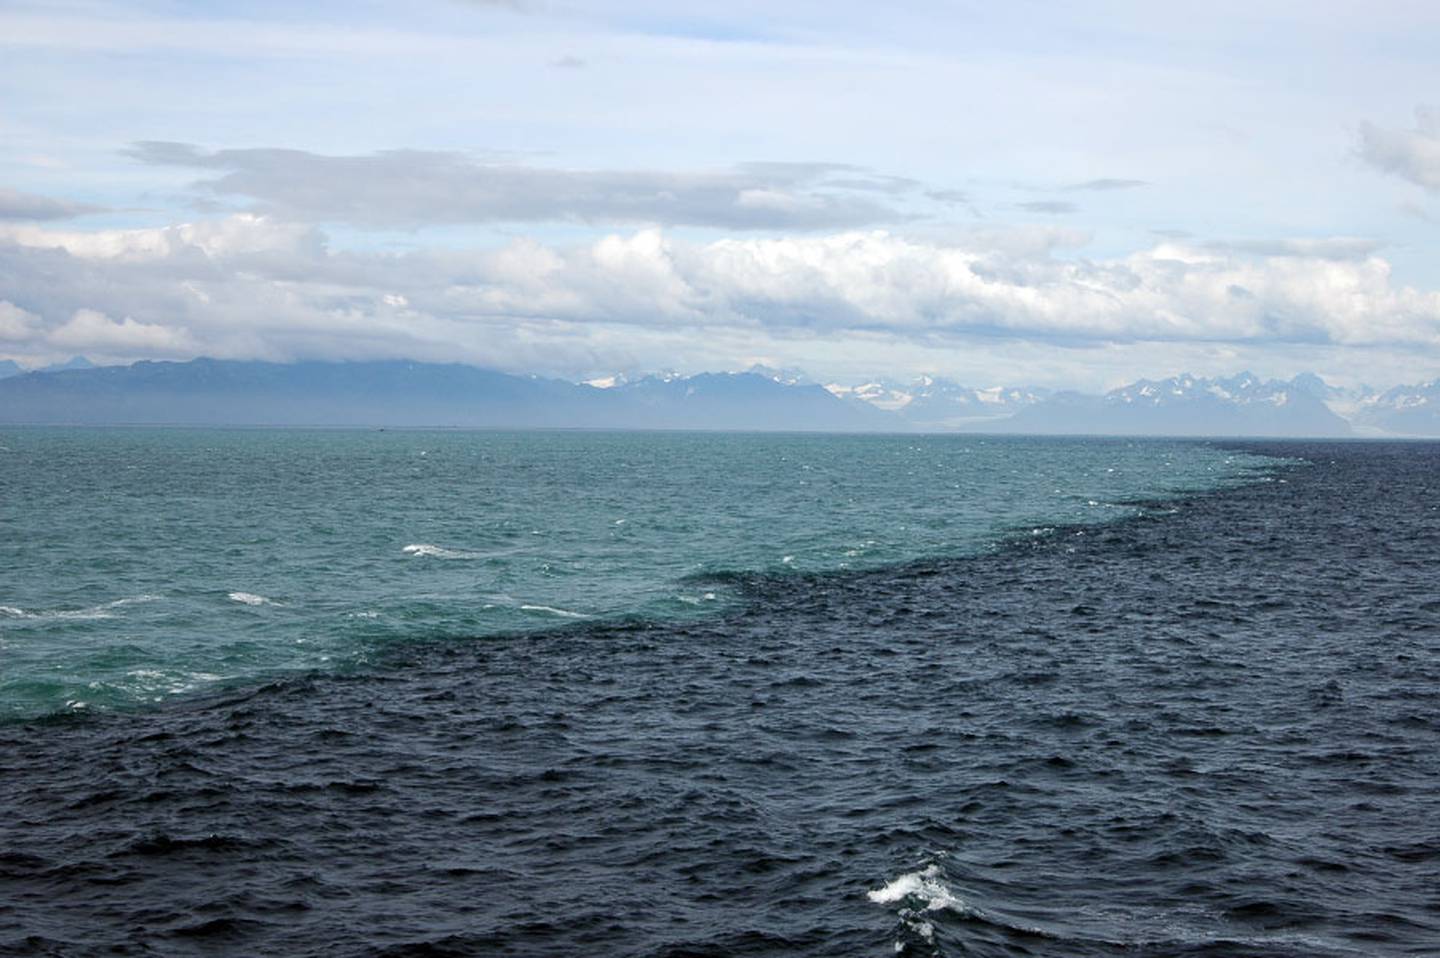 "The place where two ocean meet" Gulf of Alaska  waters